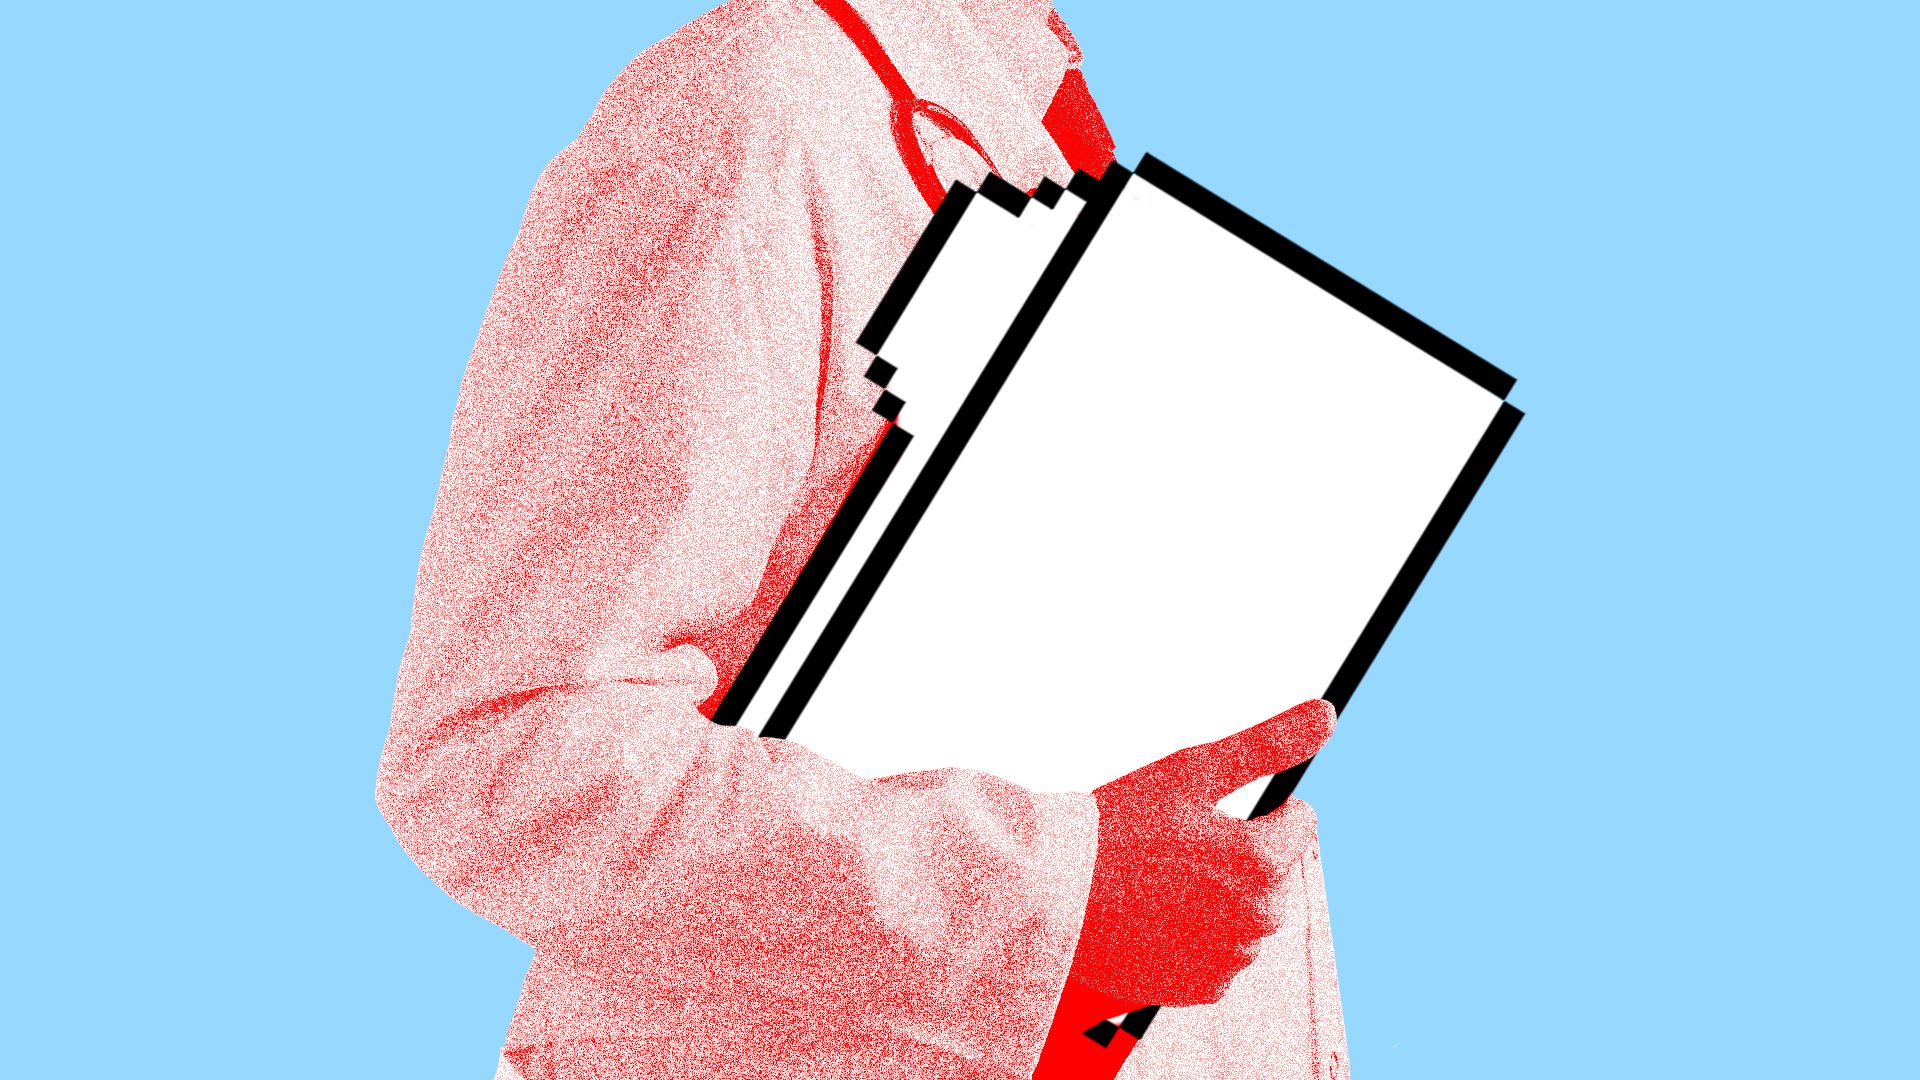 Illustration of a doctor carrying a computer as a file